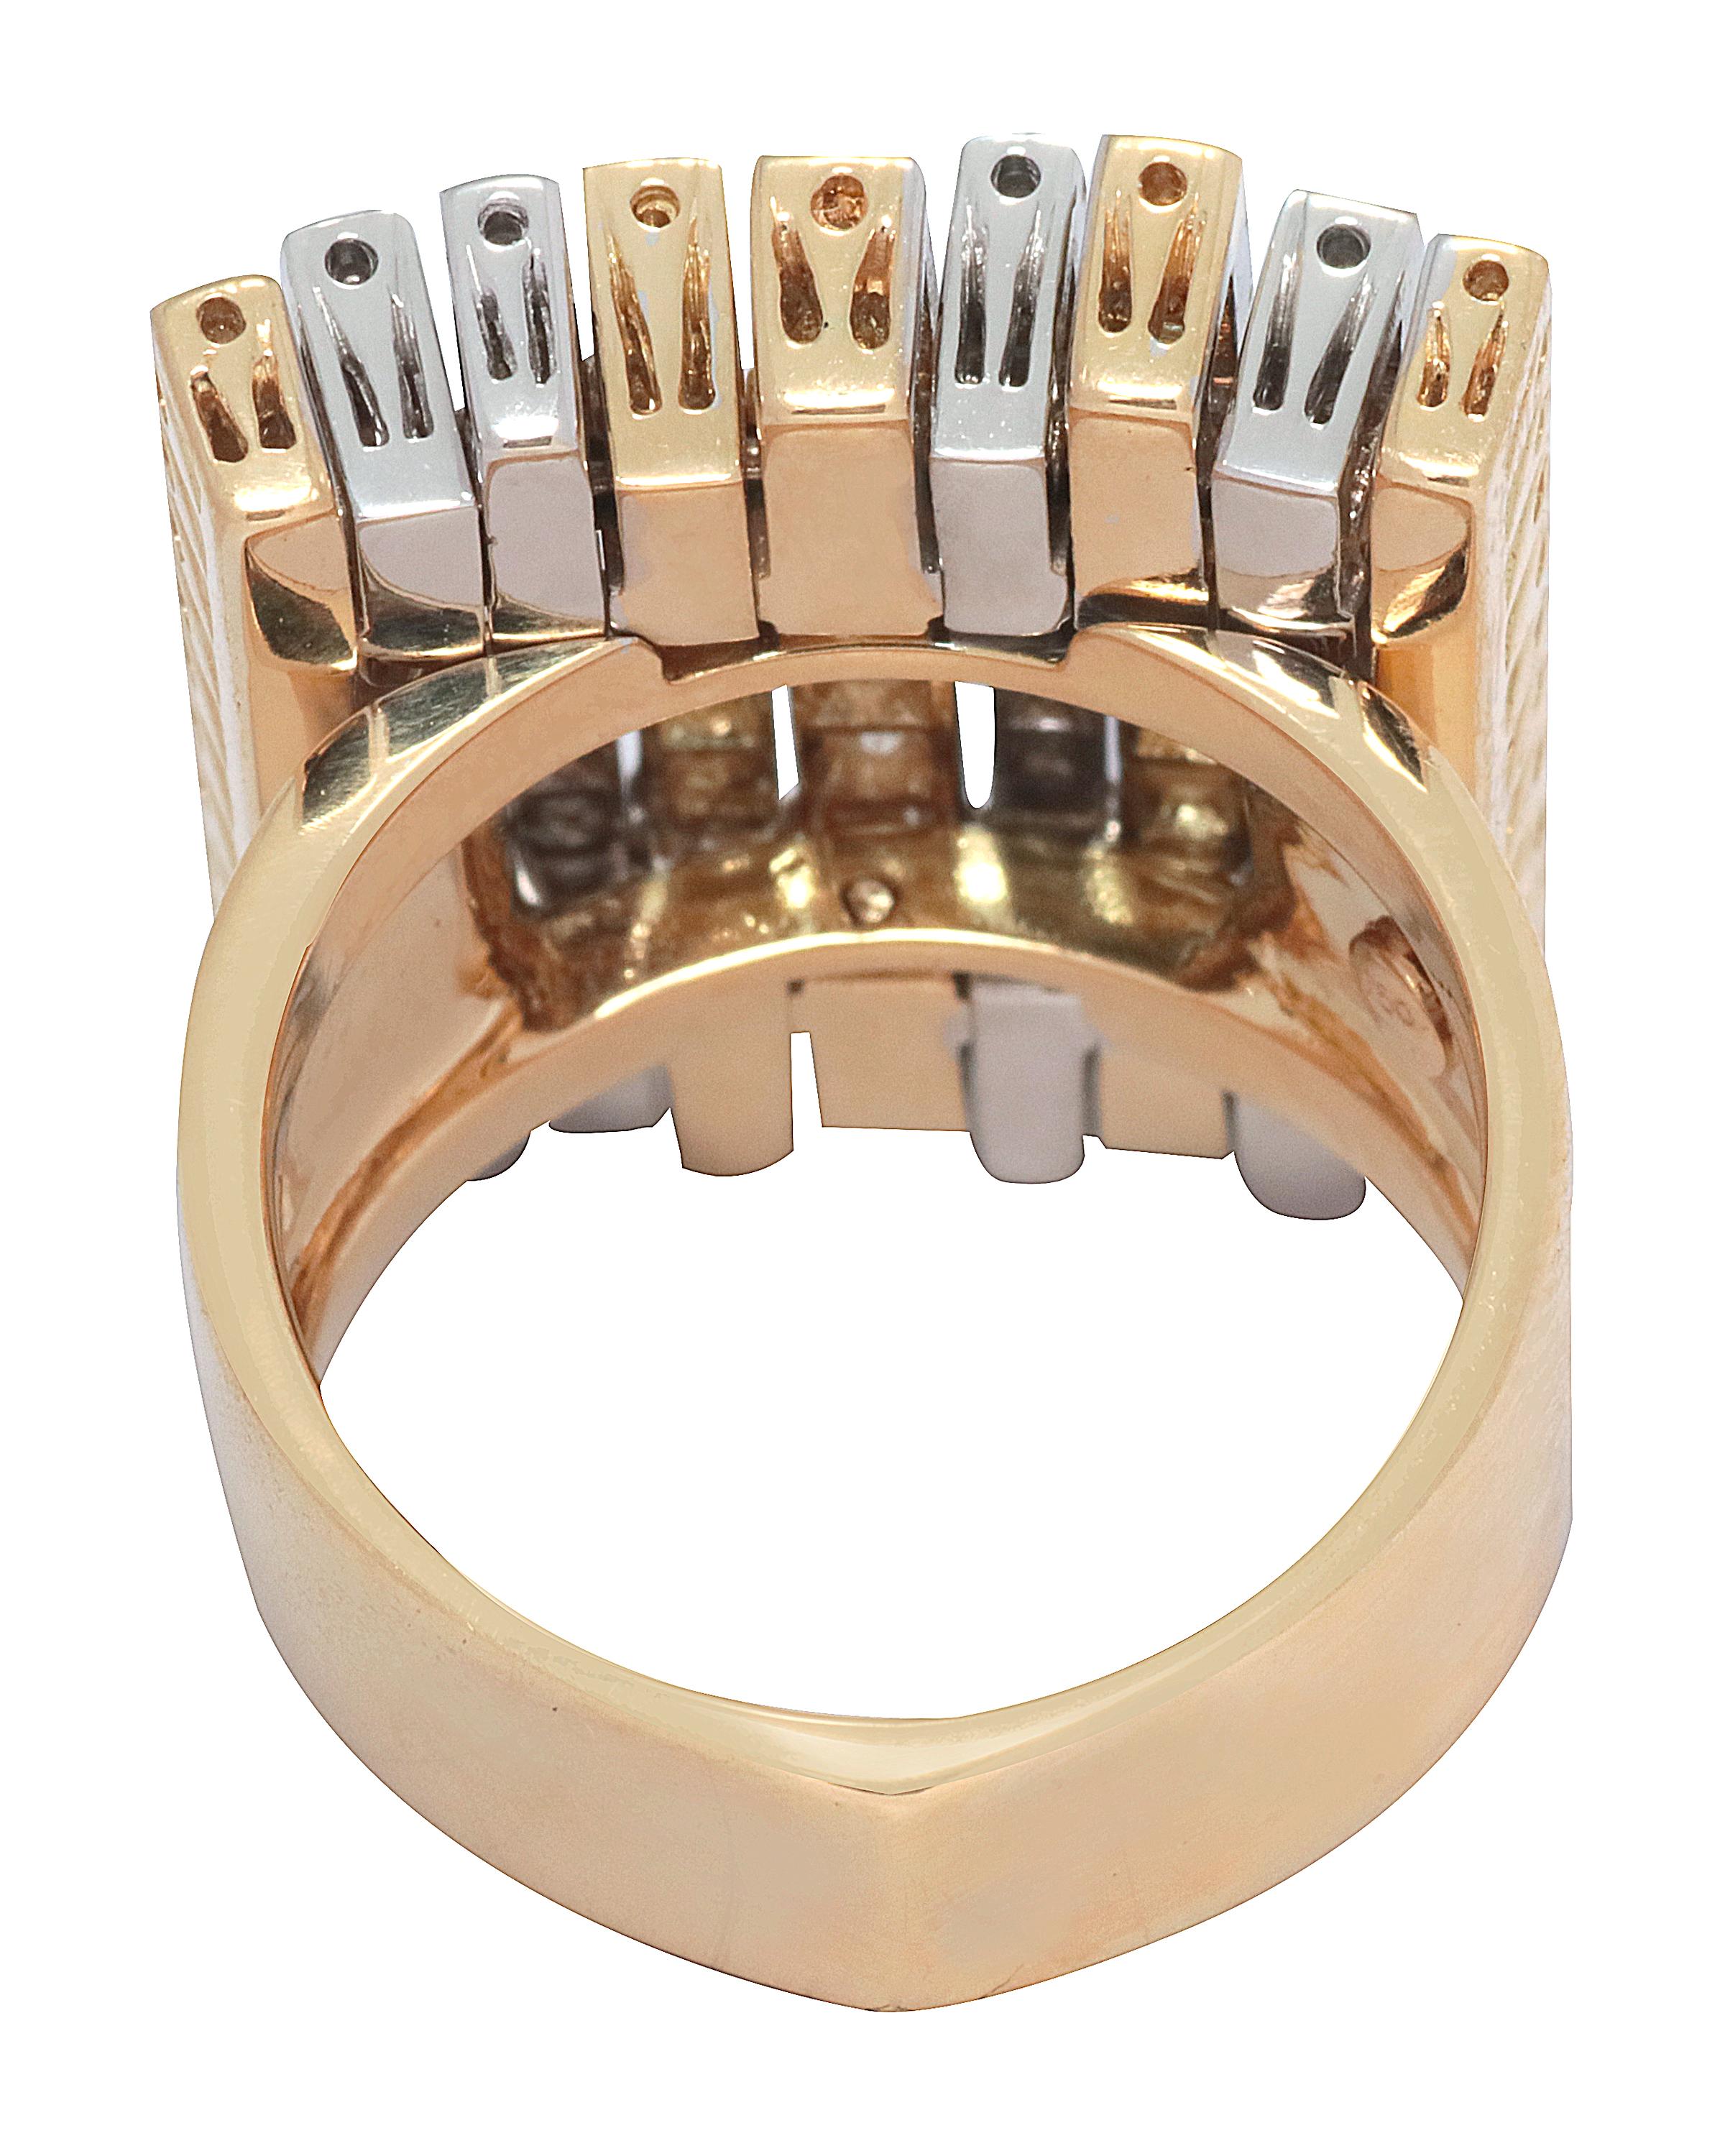 Ponte Vecchio Gioielli 18k White Gold and 18k Yellow Gold Ring. Ring Size 7.5. Diamond(1.86tcw). Shipped in Ponte Vecchio Gioielli Box. Model Number SA282BRD-56 -  Manufacturers Suggested Retail $6,420